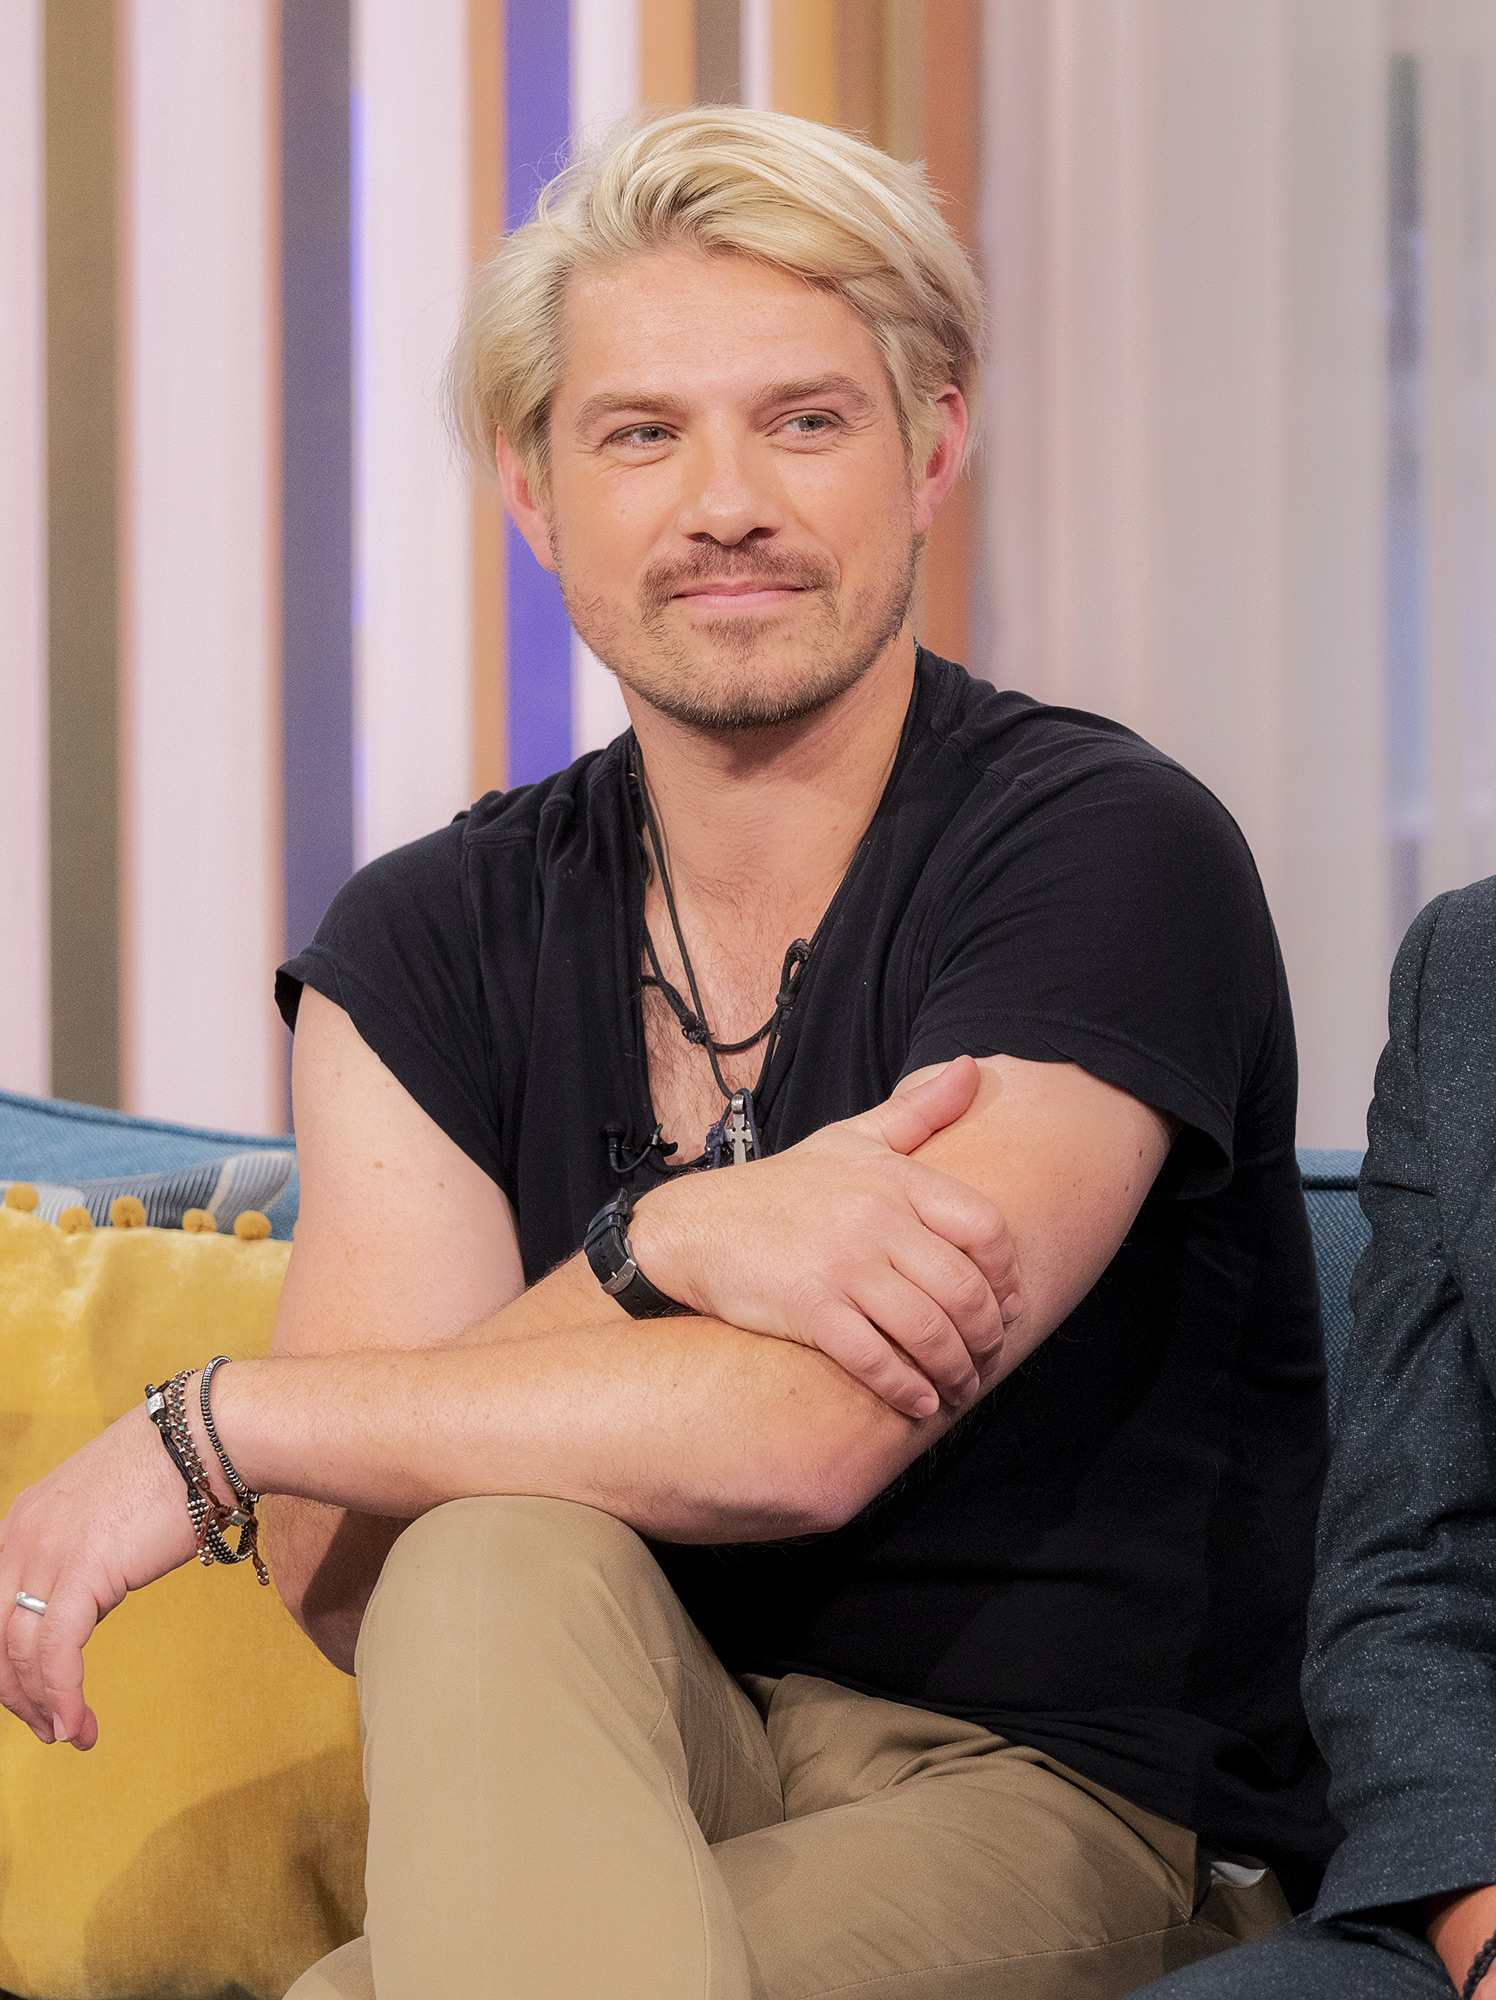 Taylor Hanson Looks Back on Band Starting Own Record Label 20 Years Ago